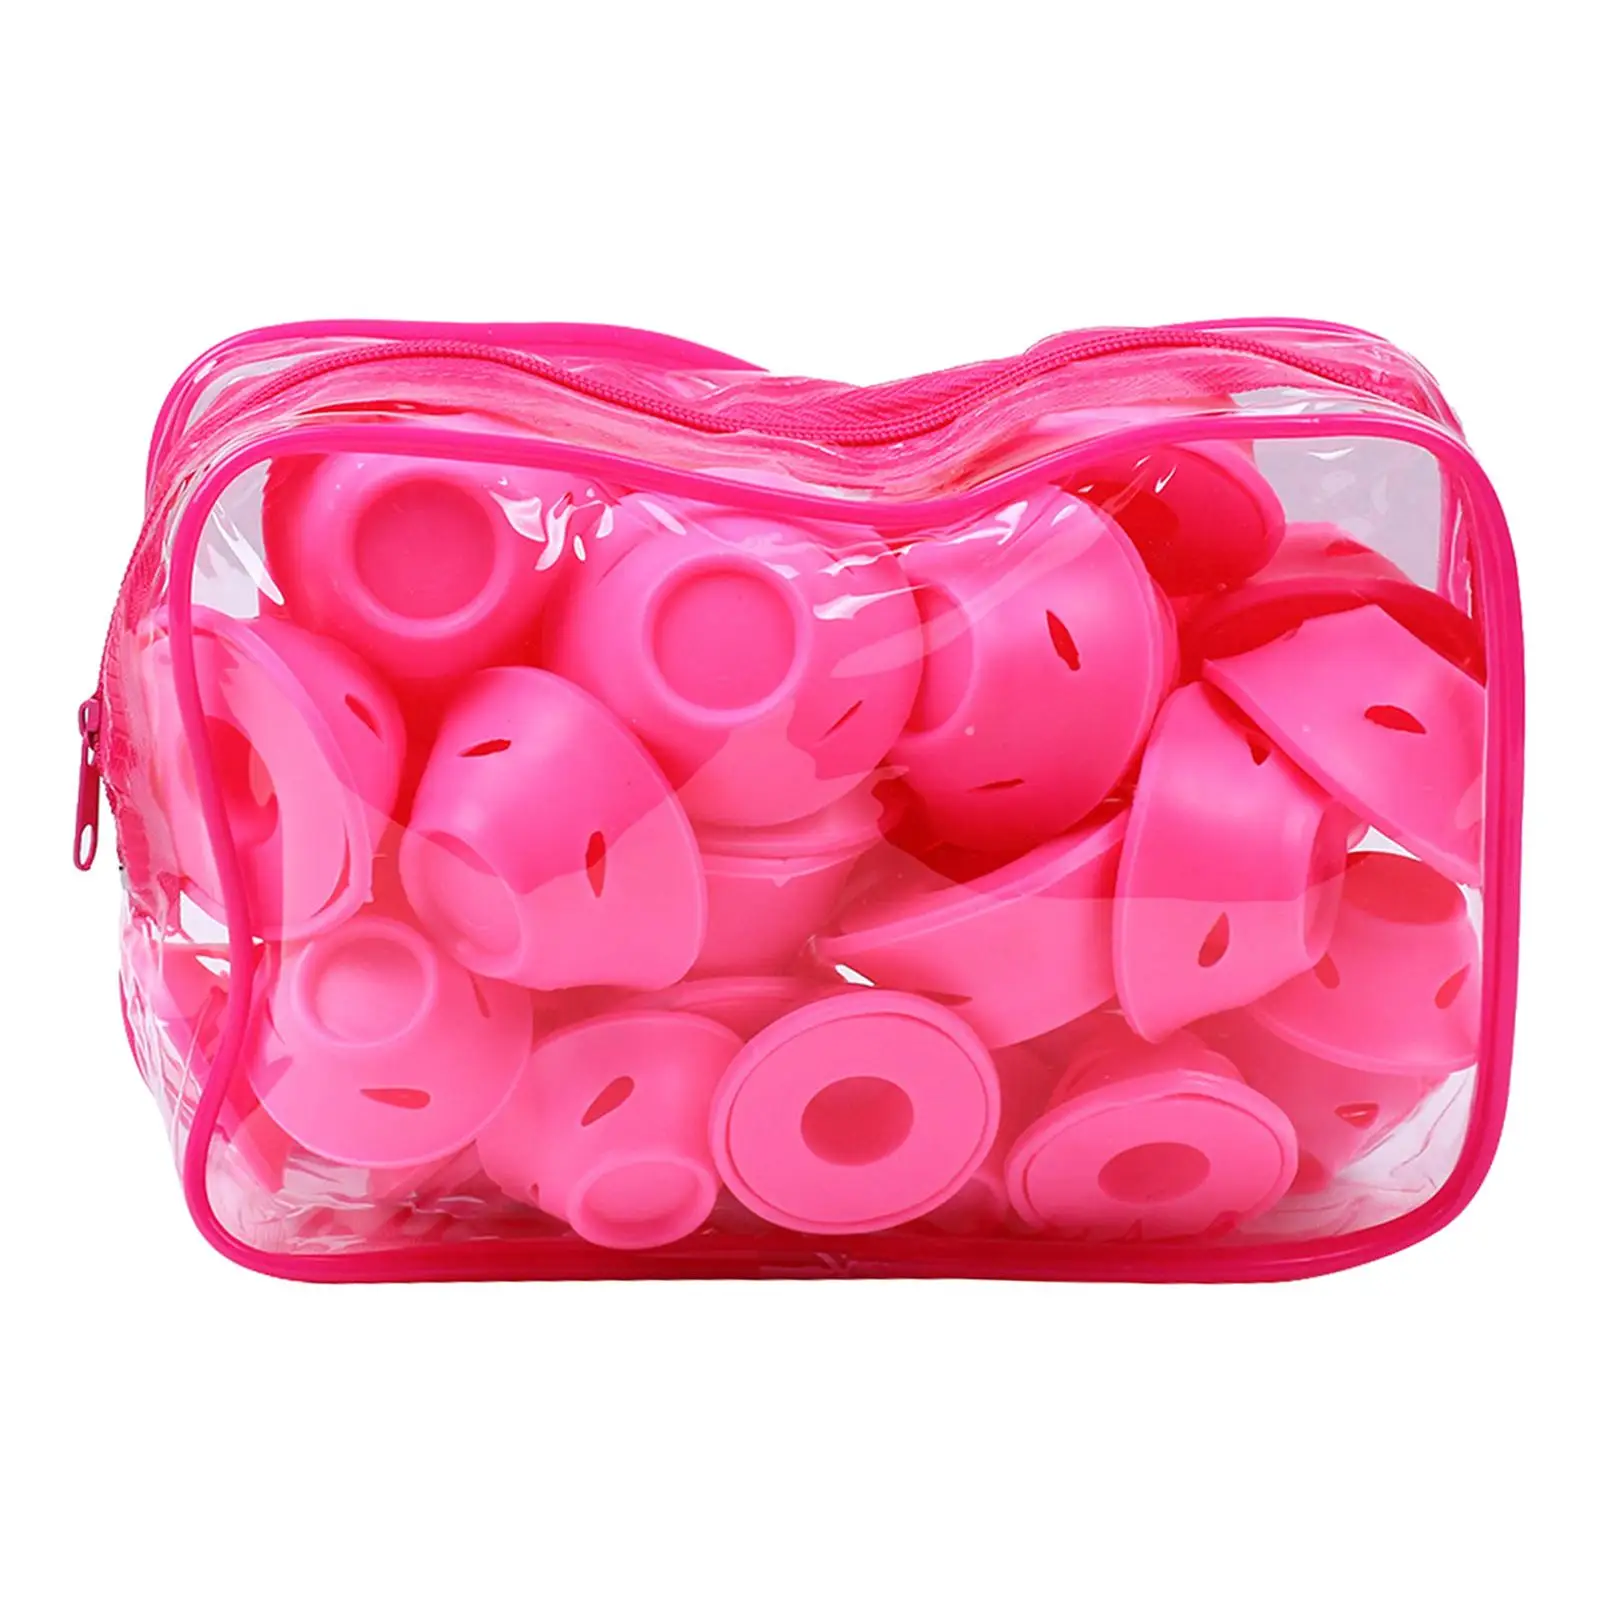 30pcs Roller No Heat Accessories   Tools Removable  Tools for Women Girls Silicone Curling